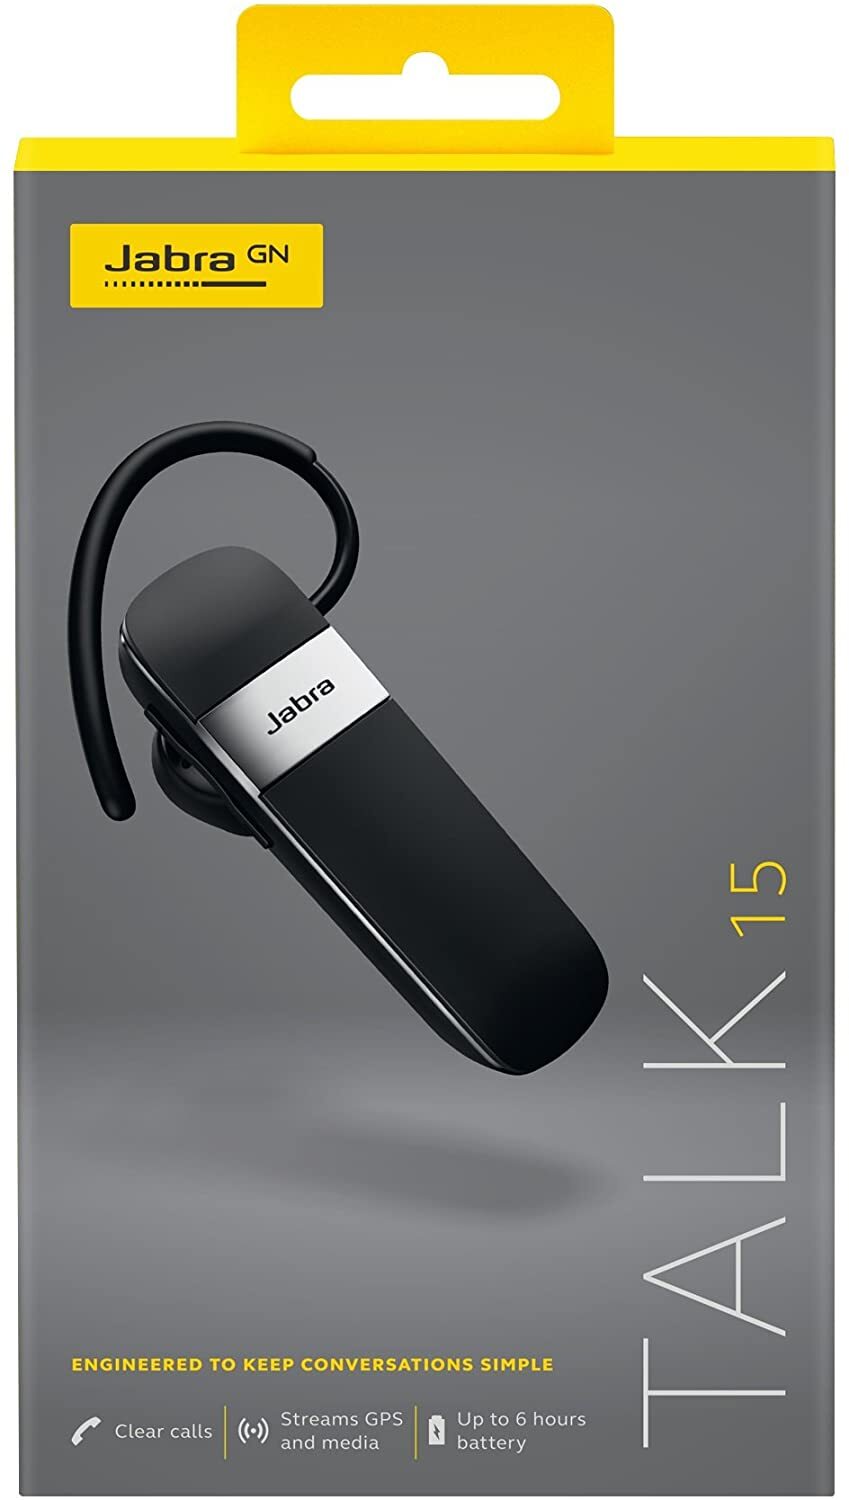 Jabra Talk 15 Bluetooth Headset for Hands-Free Calls with Clear Conversations and Ease of Use - Black-M000000000423 www.mysocially.com